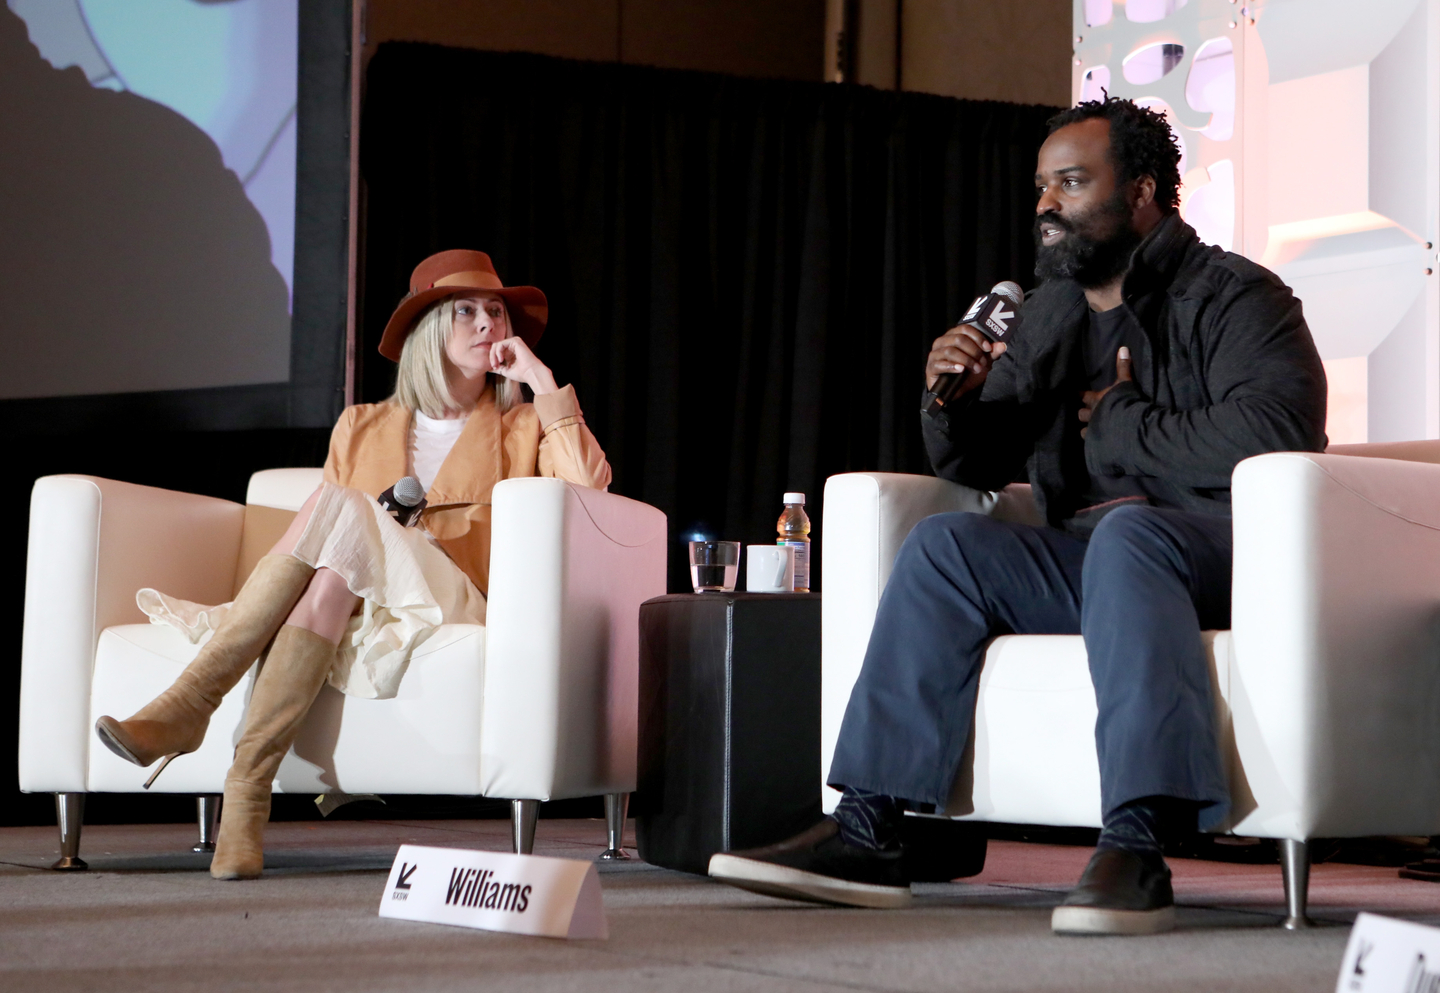 at the Cannabis and Wellness: The Body and Beyond Featured Session – Photo by Samantha Burkardt/Getty Images for SXSW